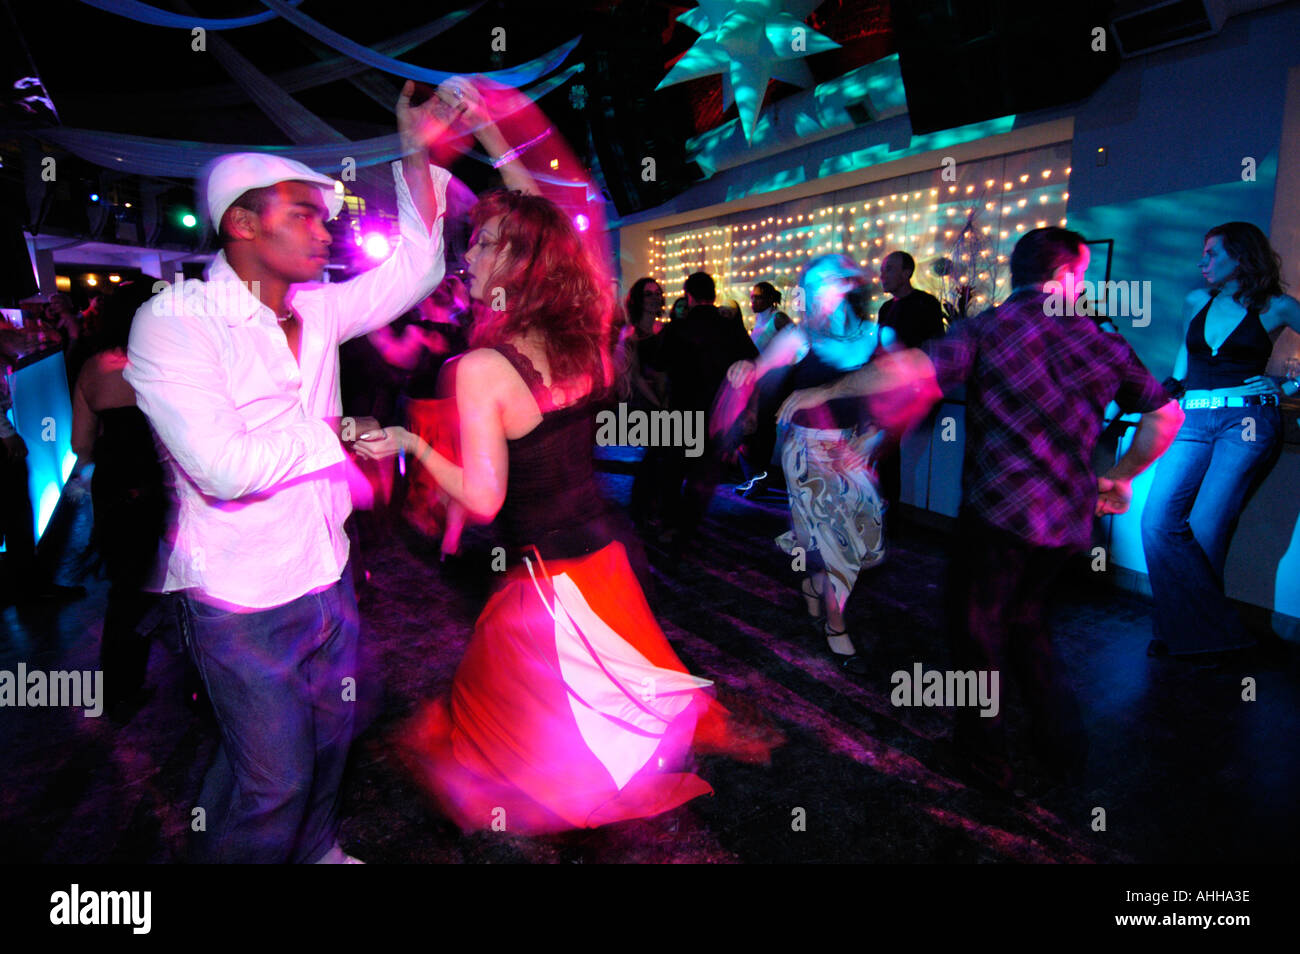 Salsa dancing at The Ministry of Sound London England UK Stock Photo